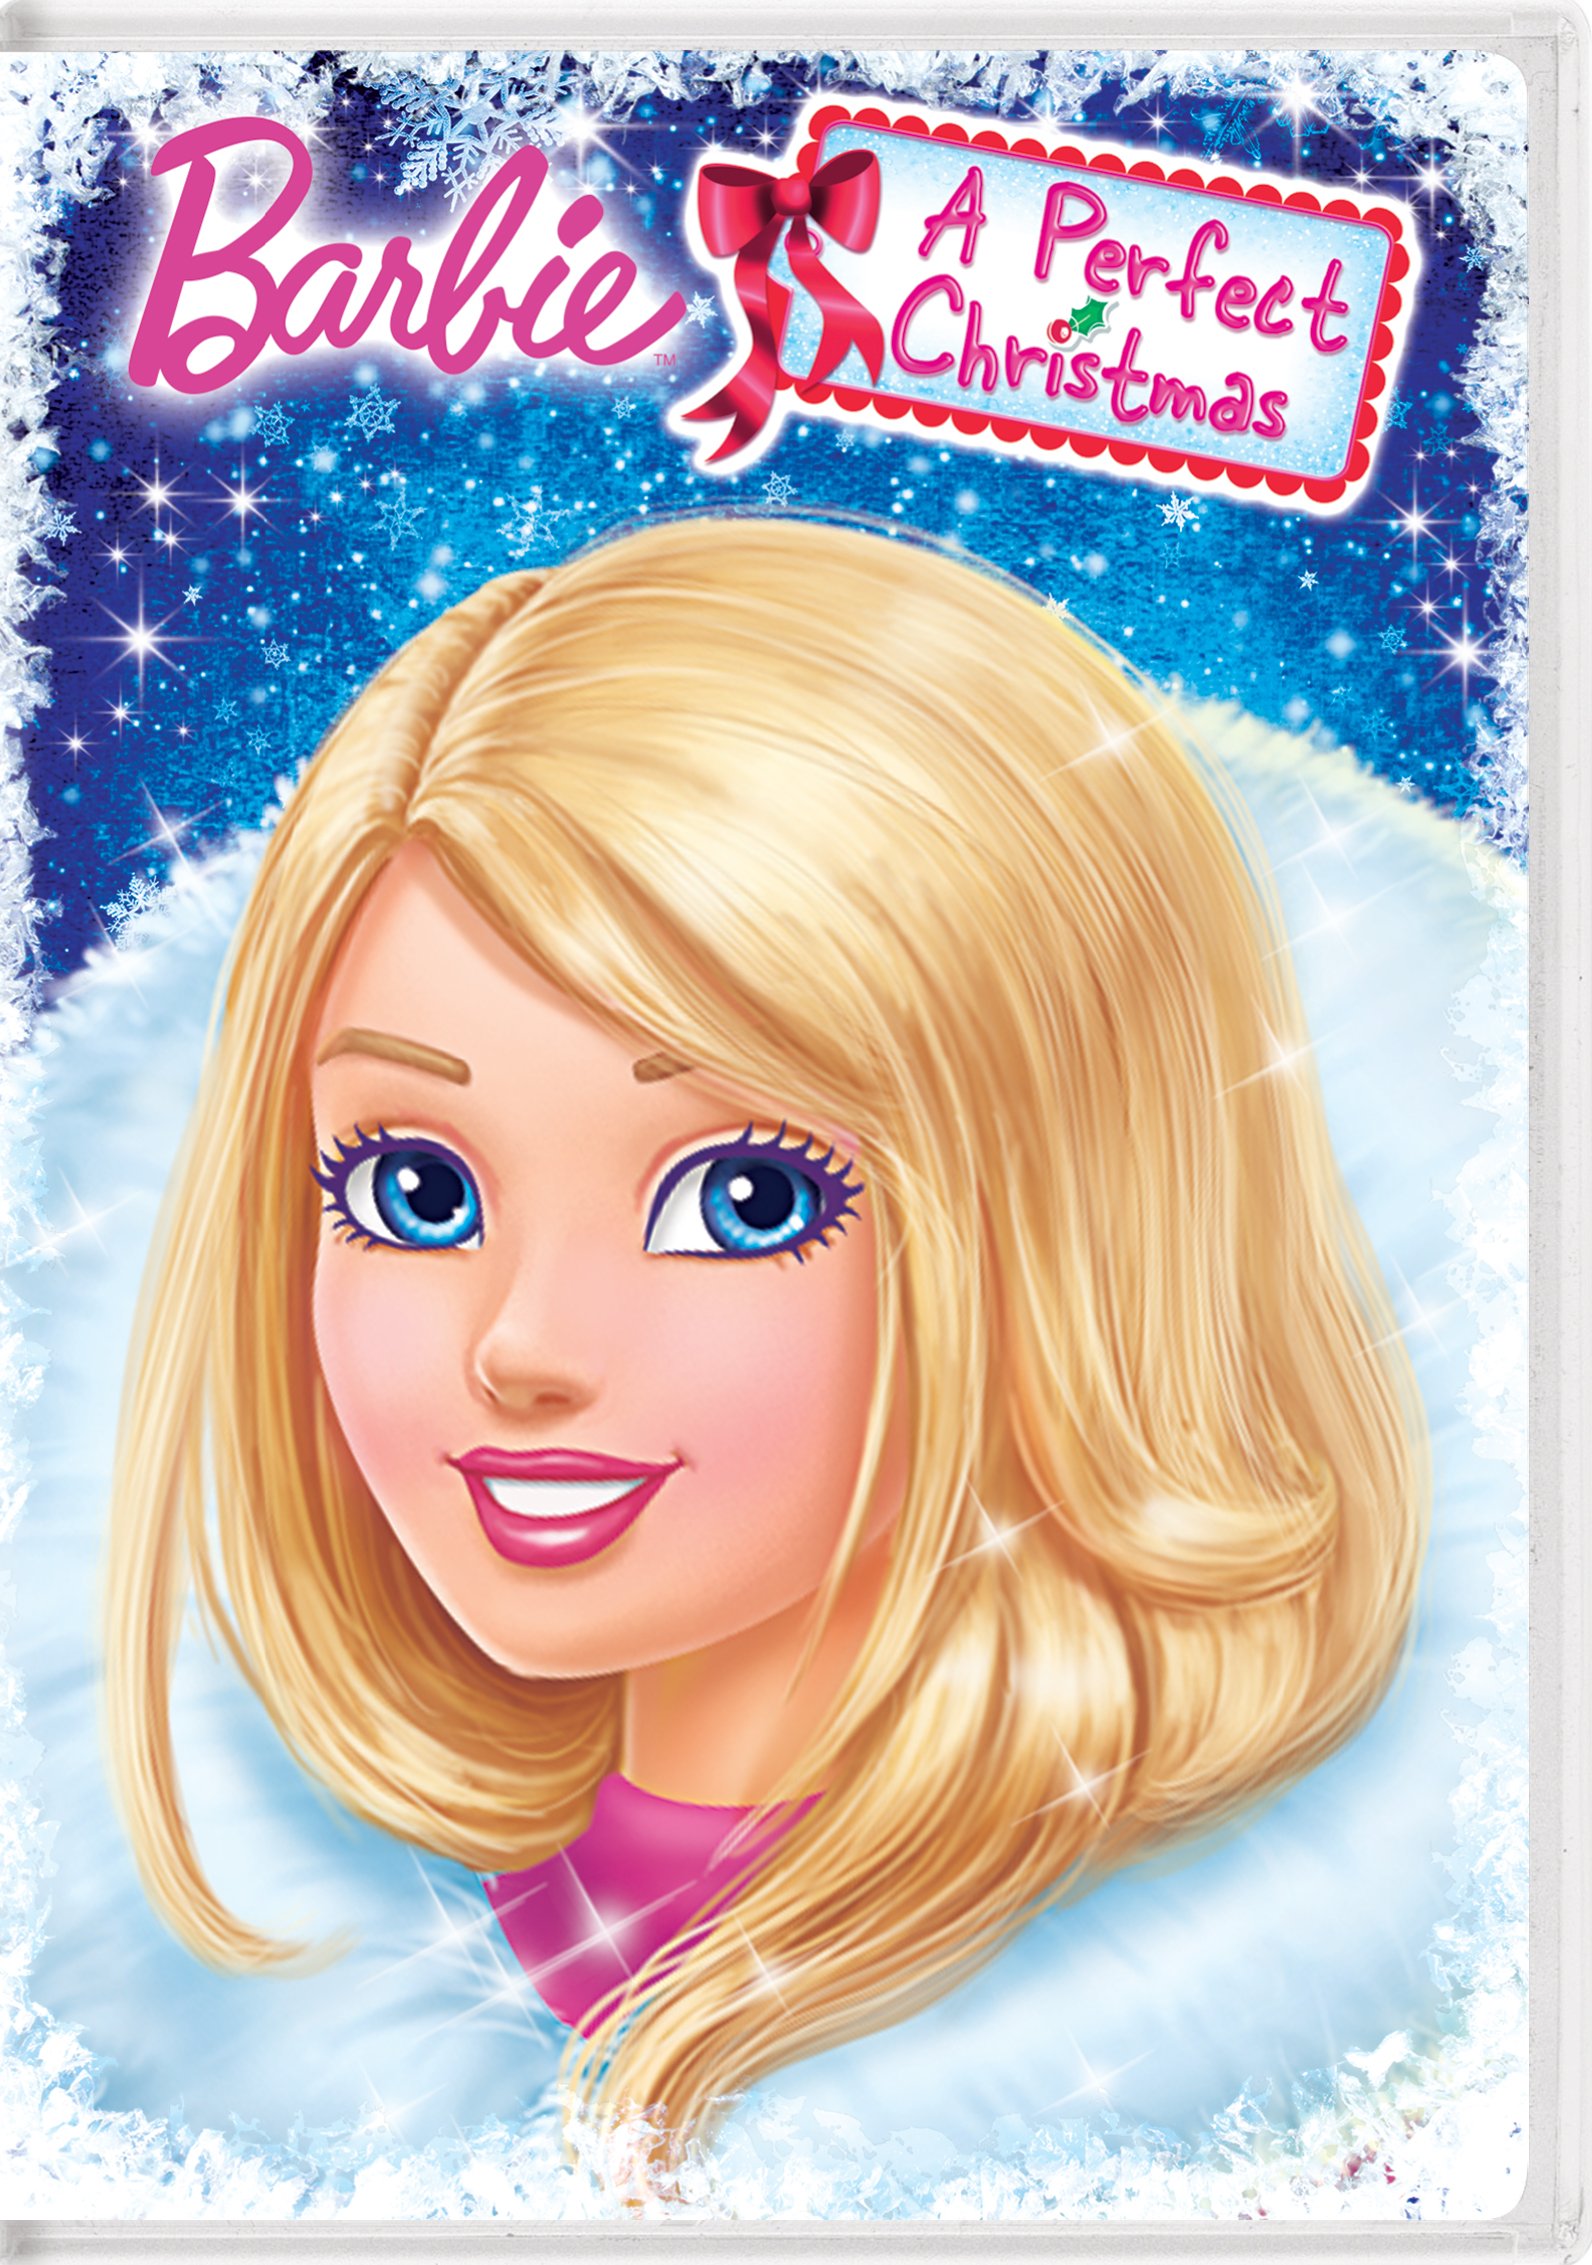 Barbie: A Perfect Christmas DVD Release Date November 8, 20111592 x 2265